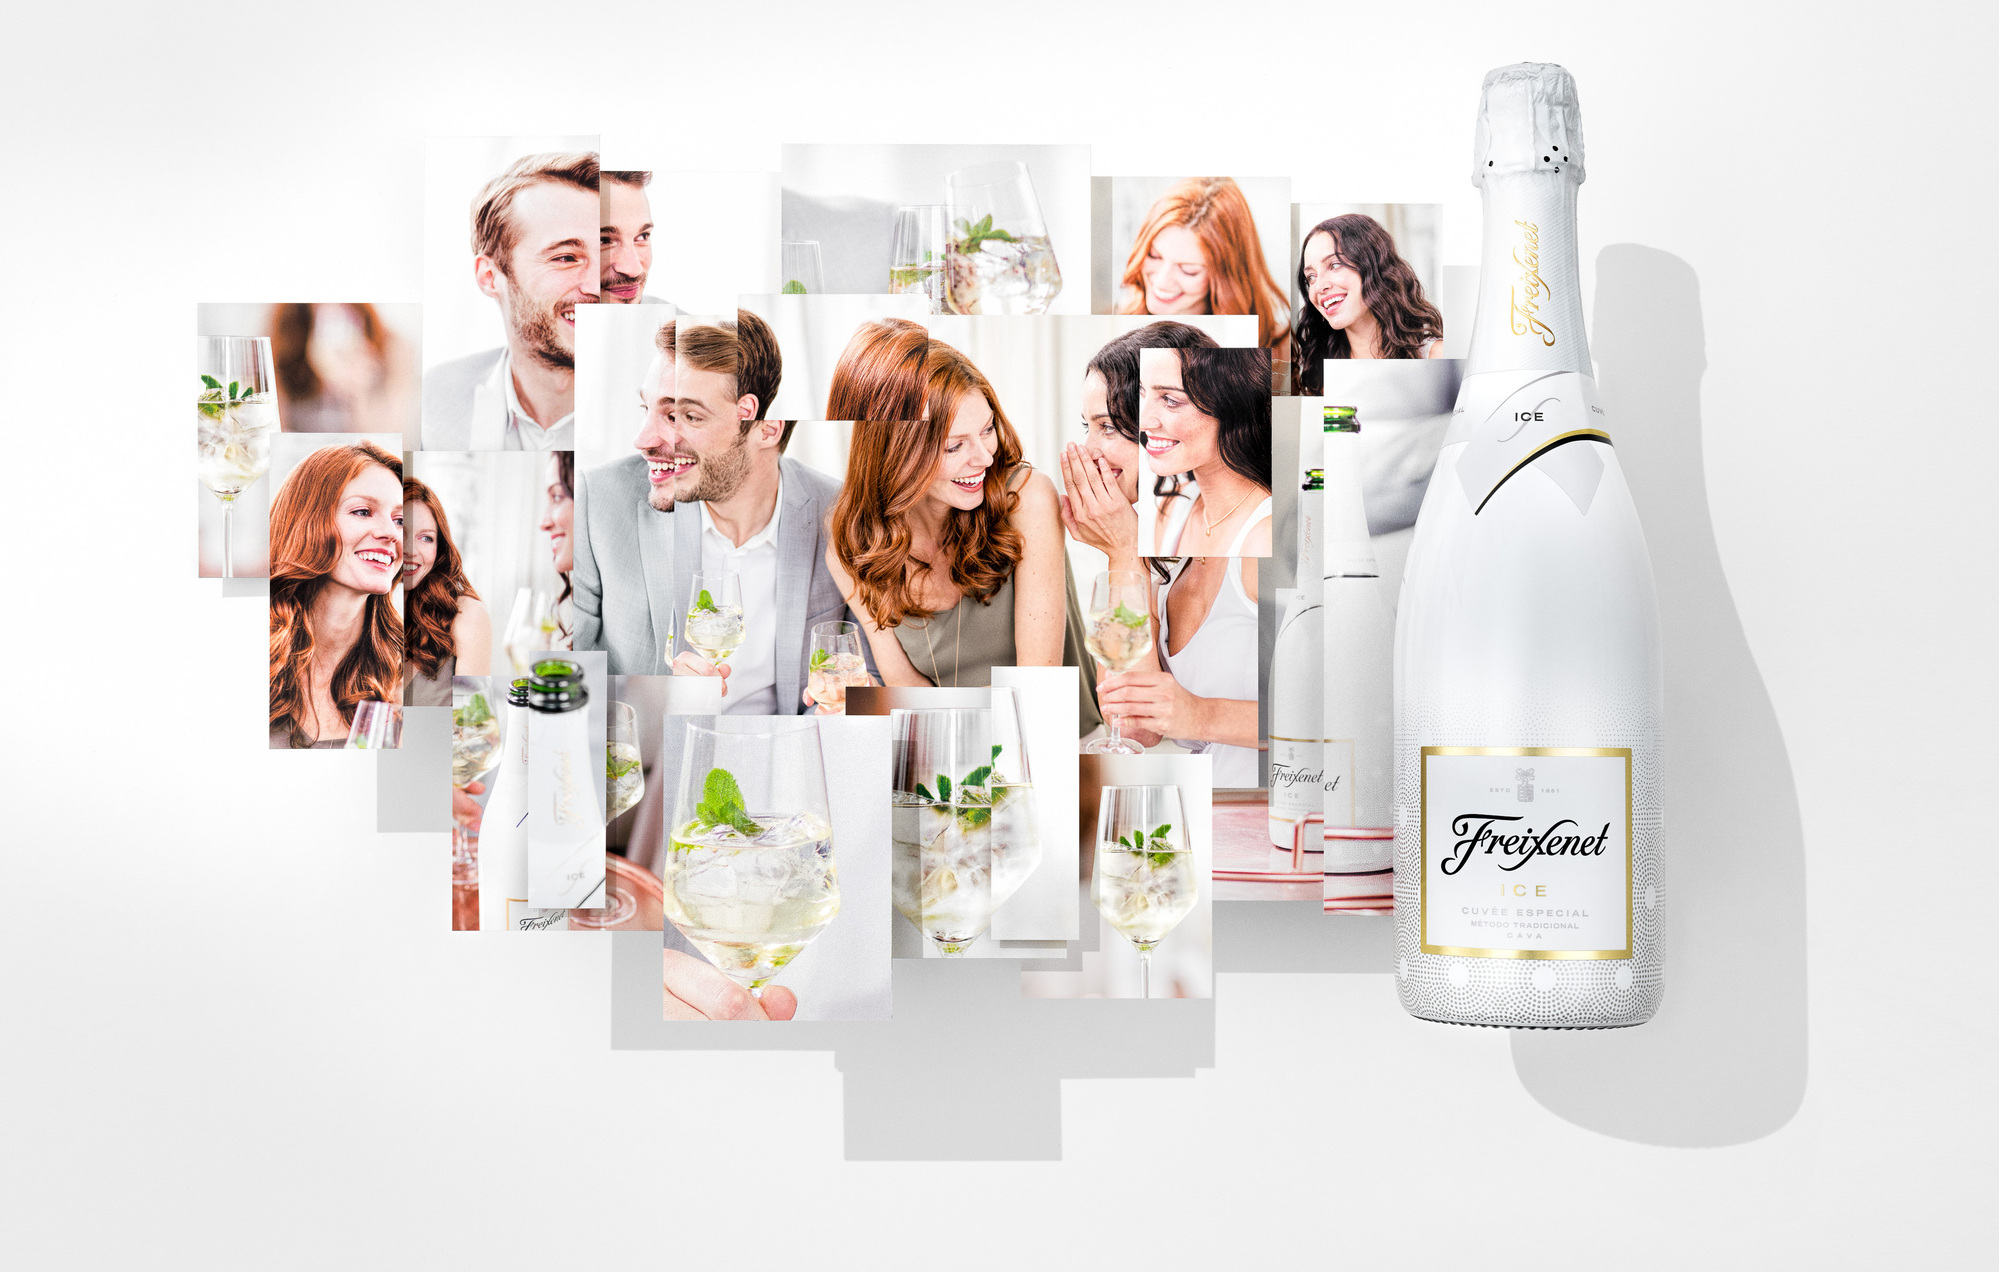 Freixenet Ice Cava Wine bottle.  Beverages and alcohol product & advertising photography by Timothy Hogan Studio in Los Angeles